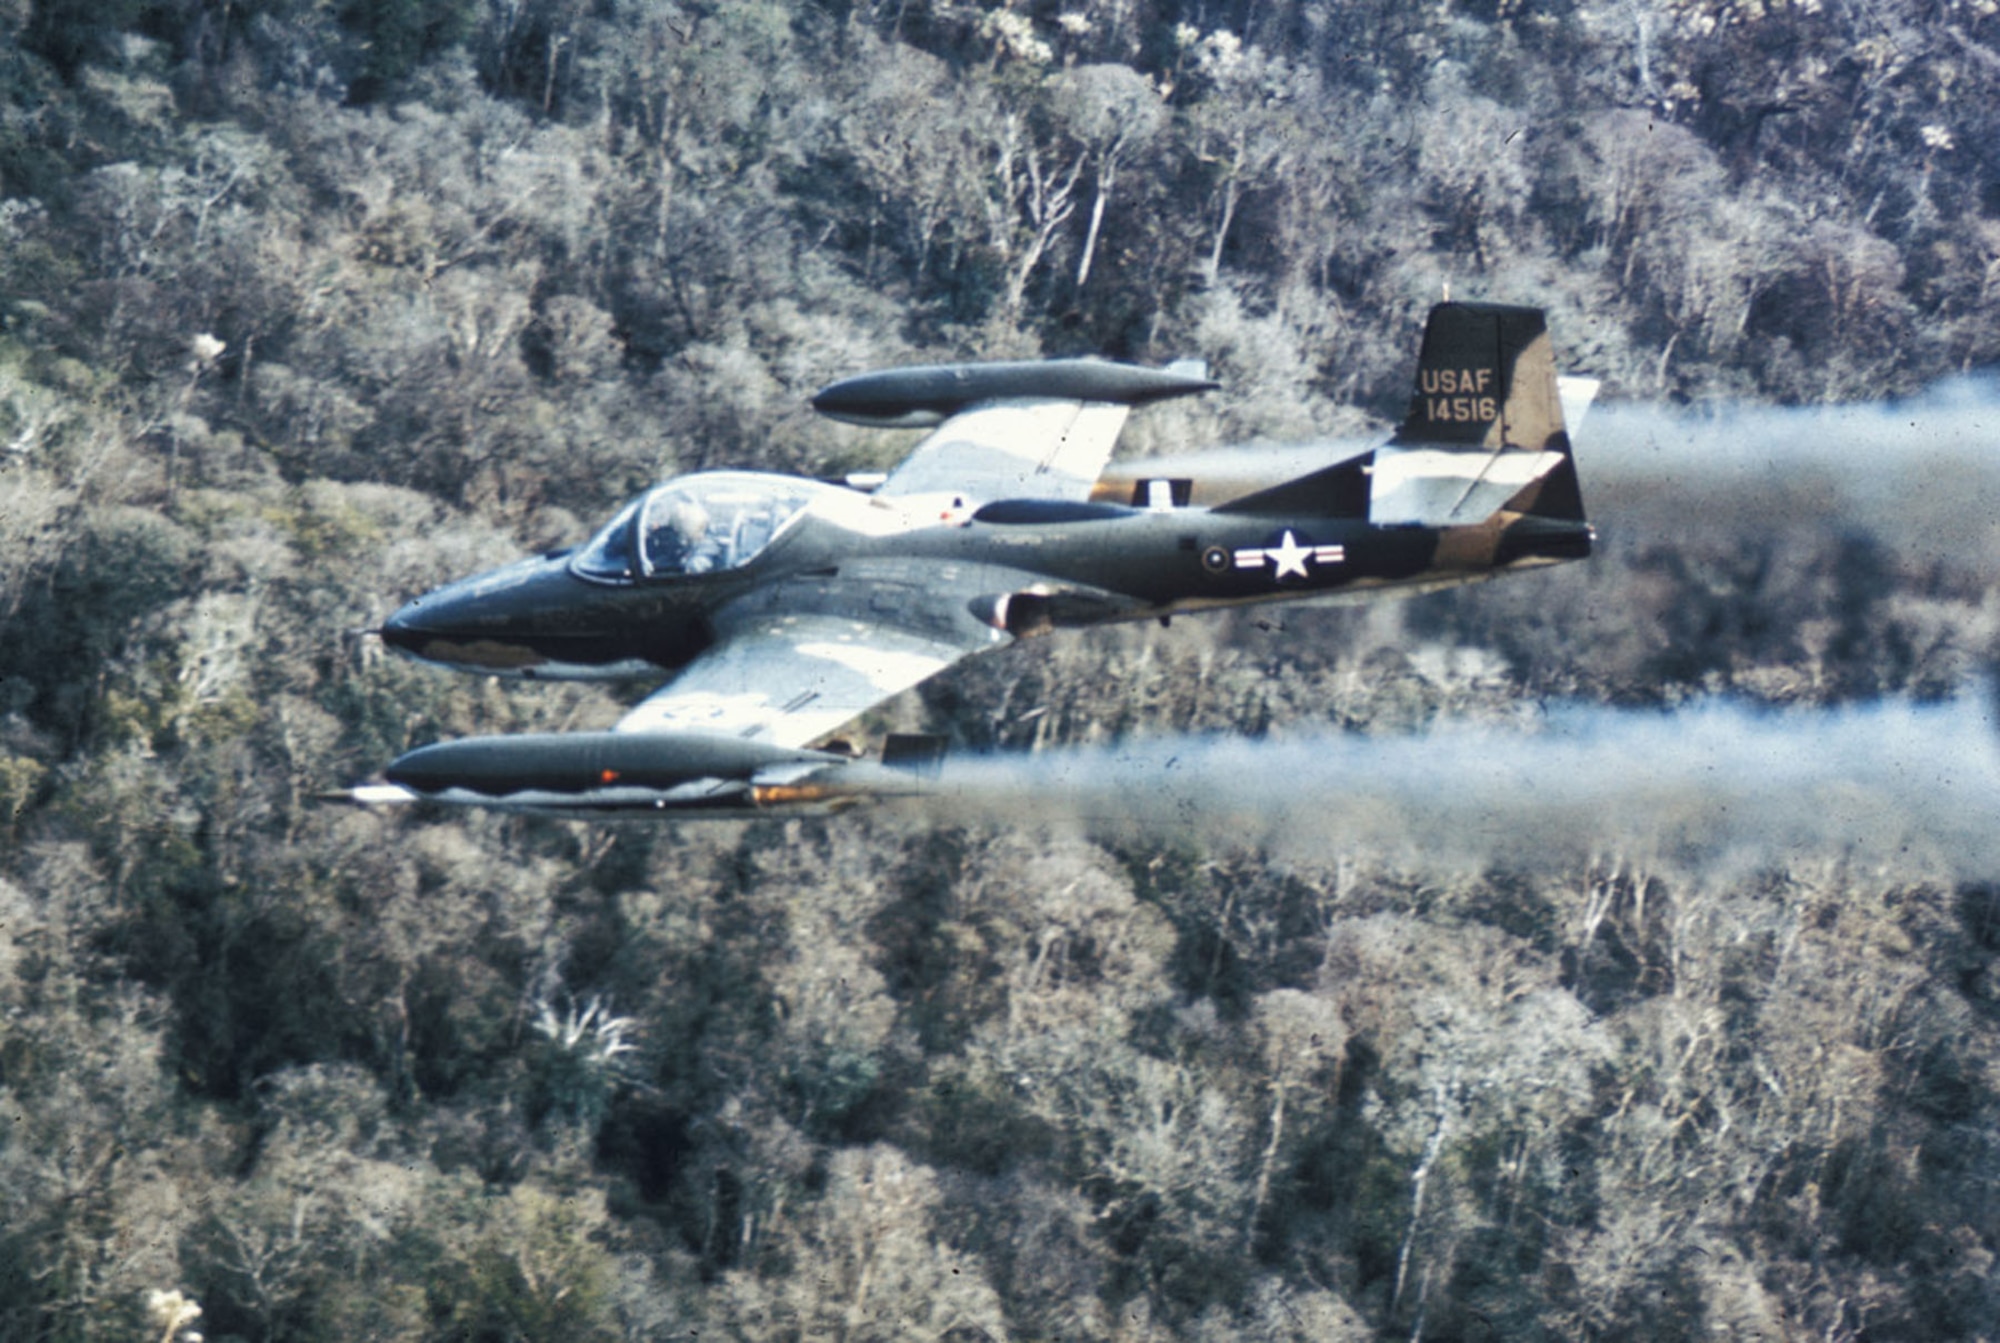 John Serlet’s unit in South Vietnam flew the A-37A Dragonfly attack aircraft and proved its capability to provide close air support and forward air control employment during the Combat Dragon project.  (U.S. Air Force photo)